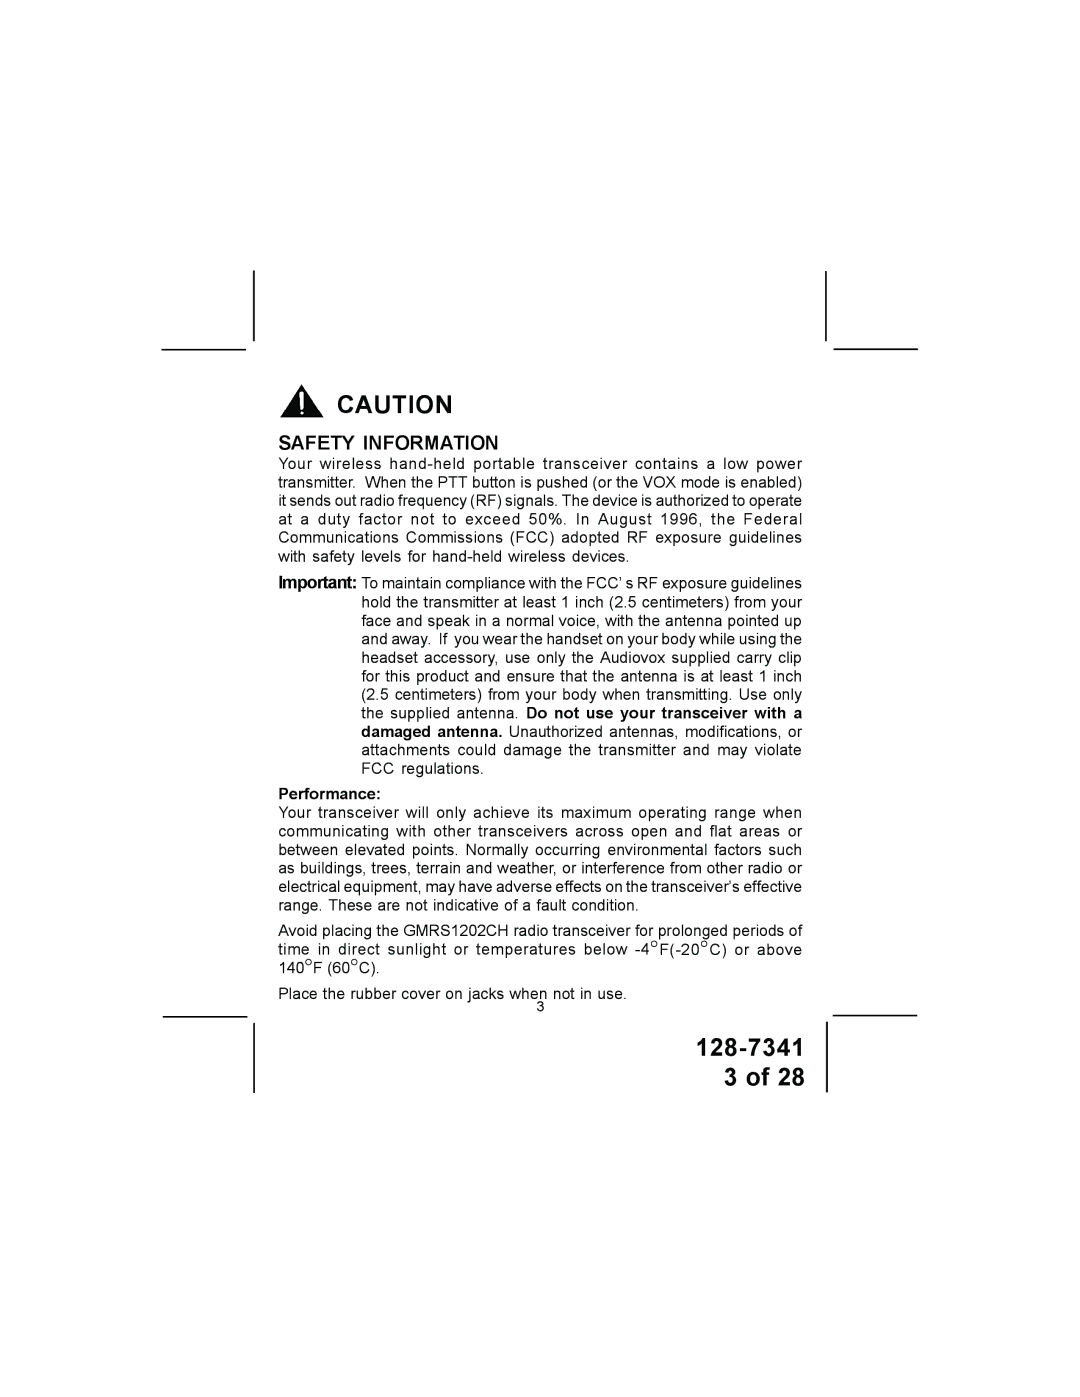 Audiovox GMRS1202CH owner manual Safety Information, Performance 